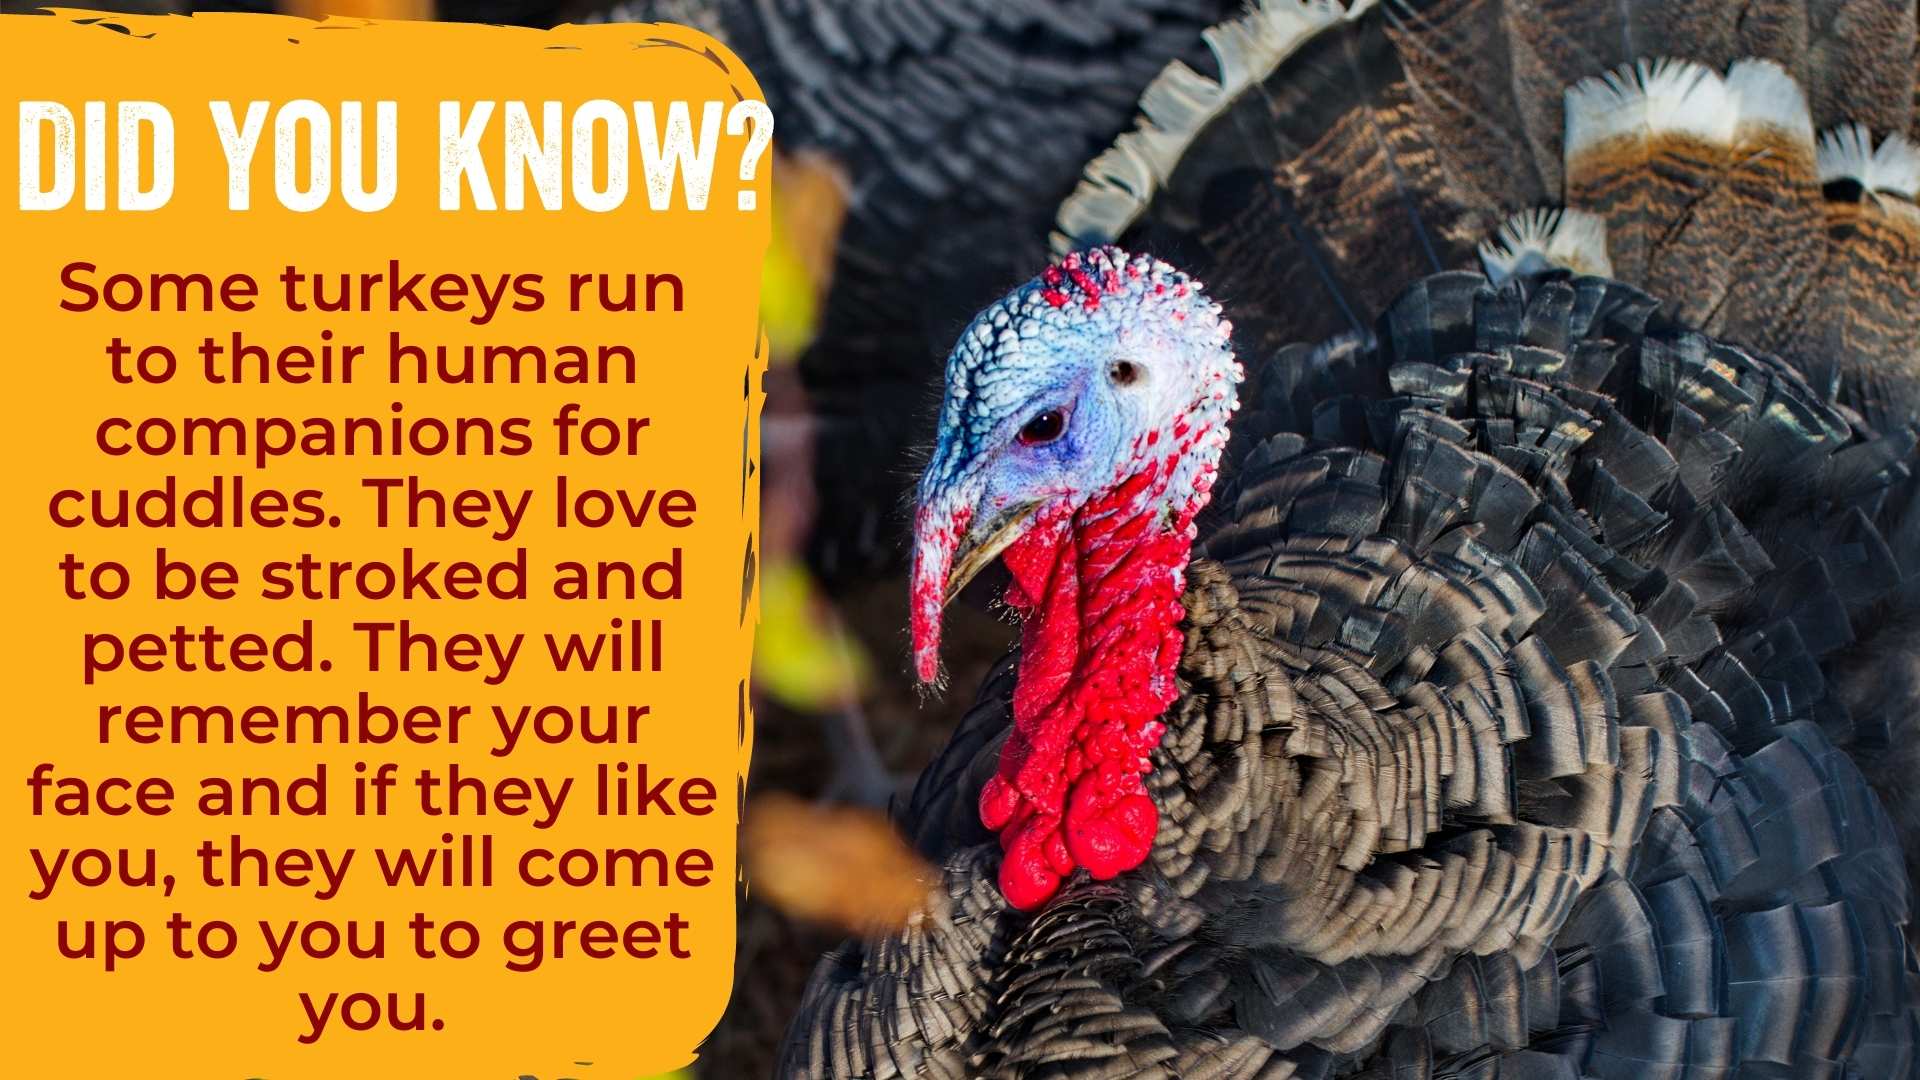 Some turkeys run to their human companions for cuddles. They love to be stroked and petted. They will remember your face and if they like you, they will come up to you to greet you.